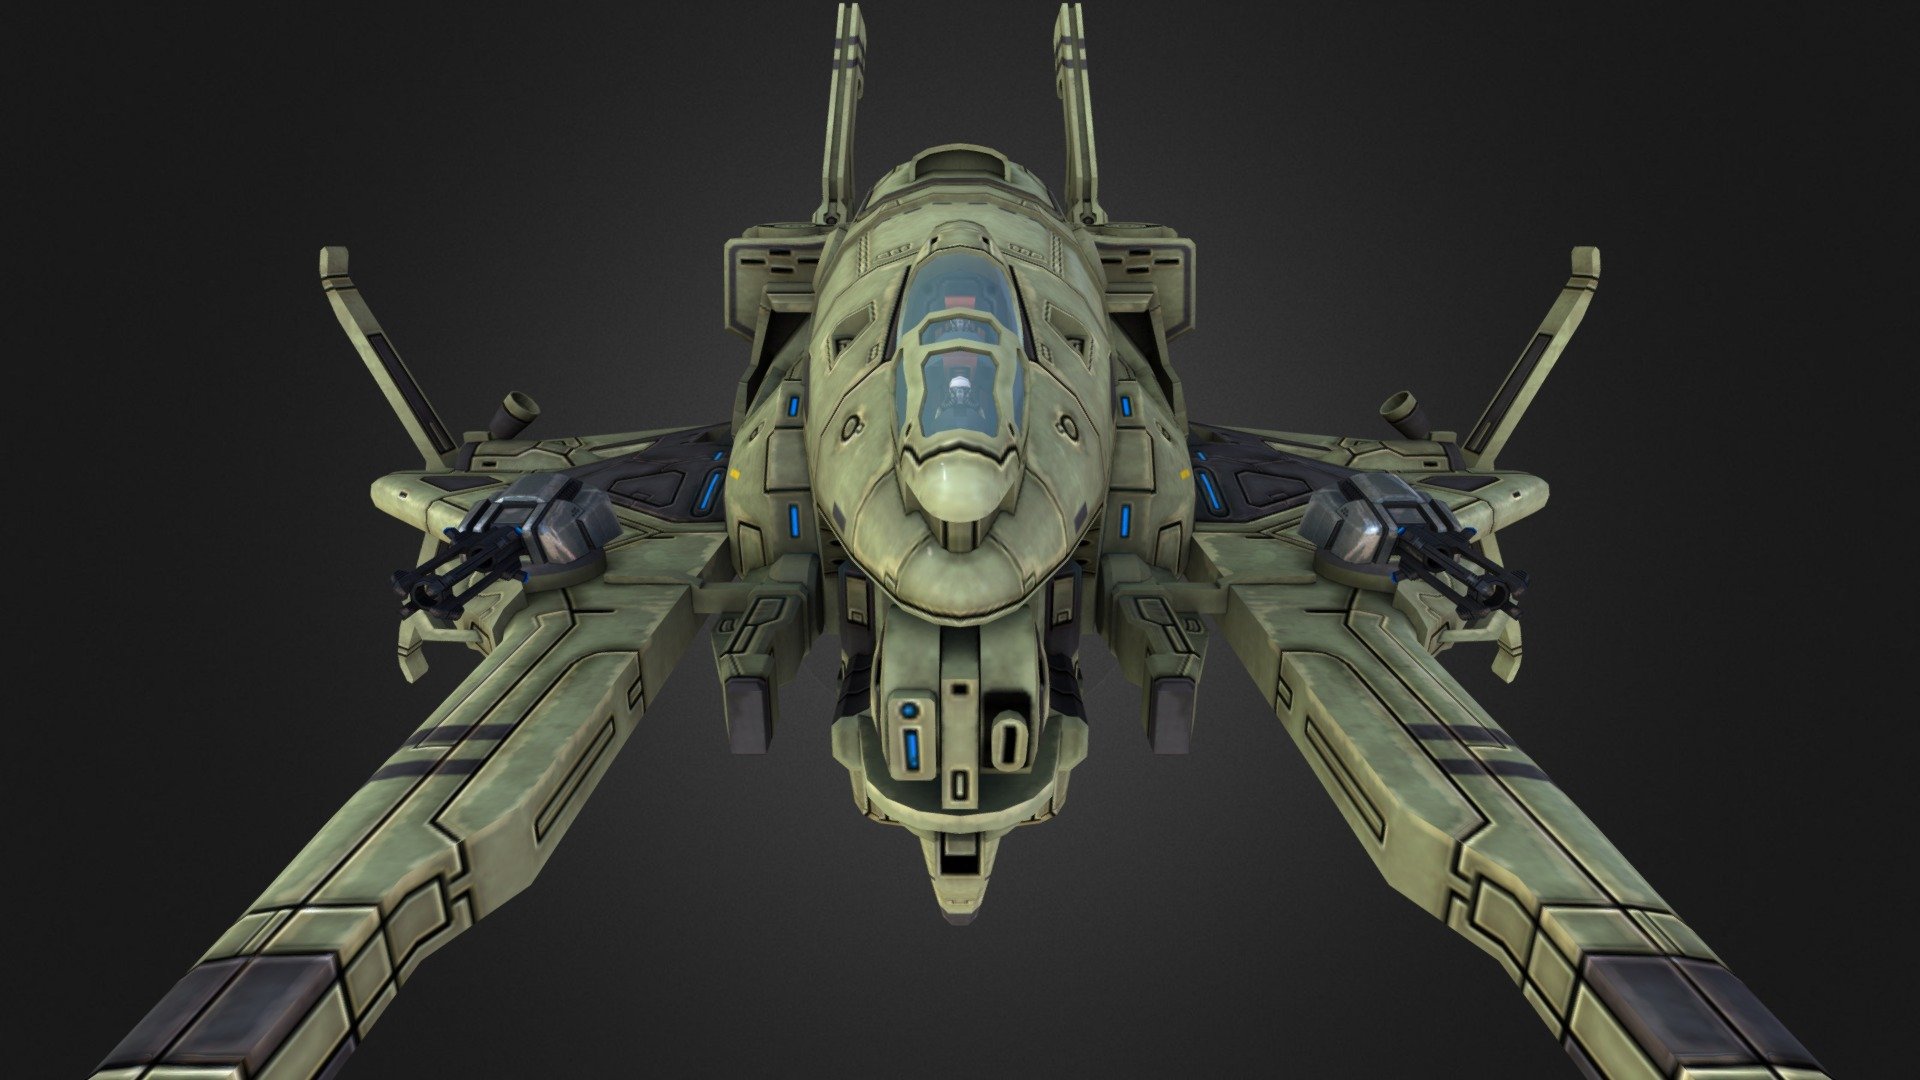 Probably the most well-known Federation tackler. Unique design pleases the eye, and impressive firepower makes it a very dangerous asset in battle 3d model